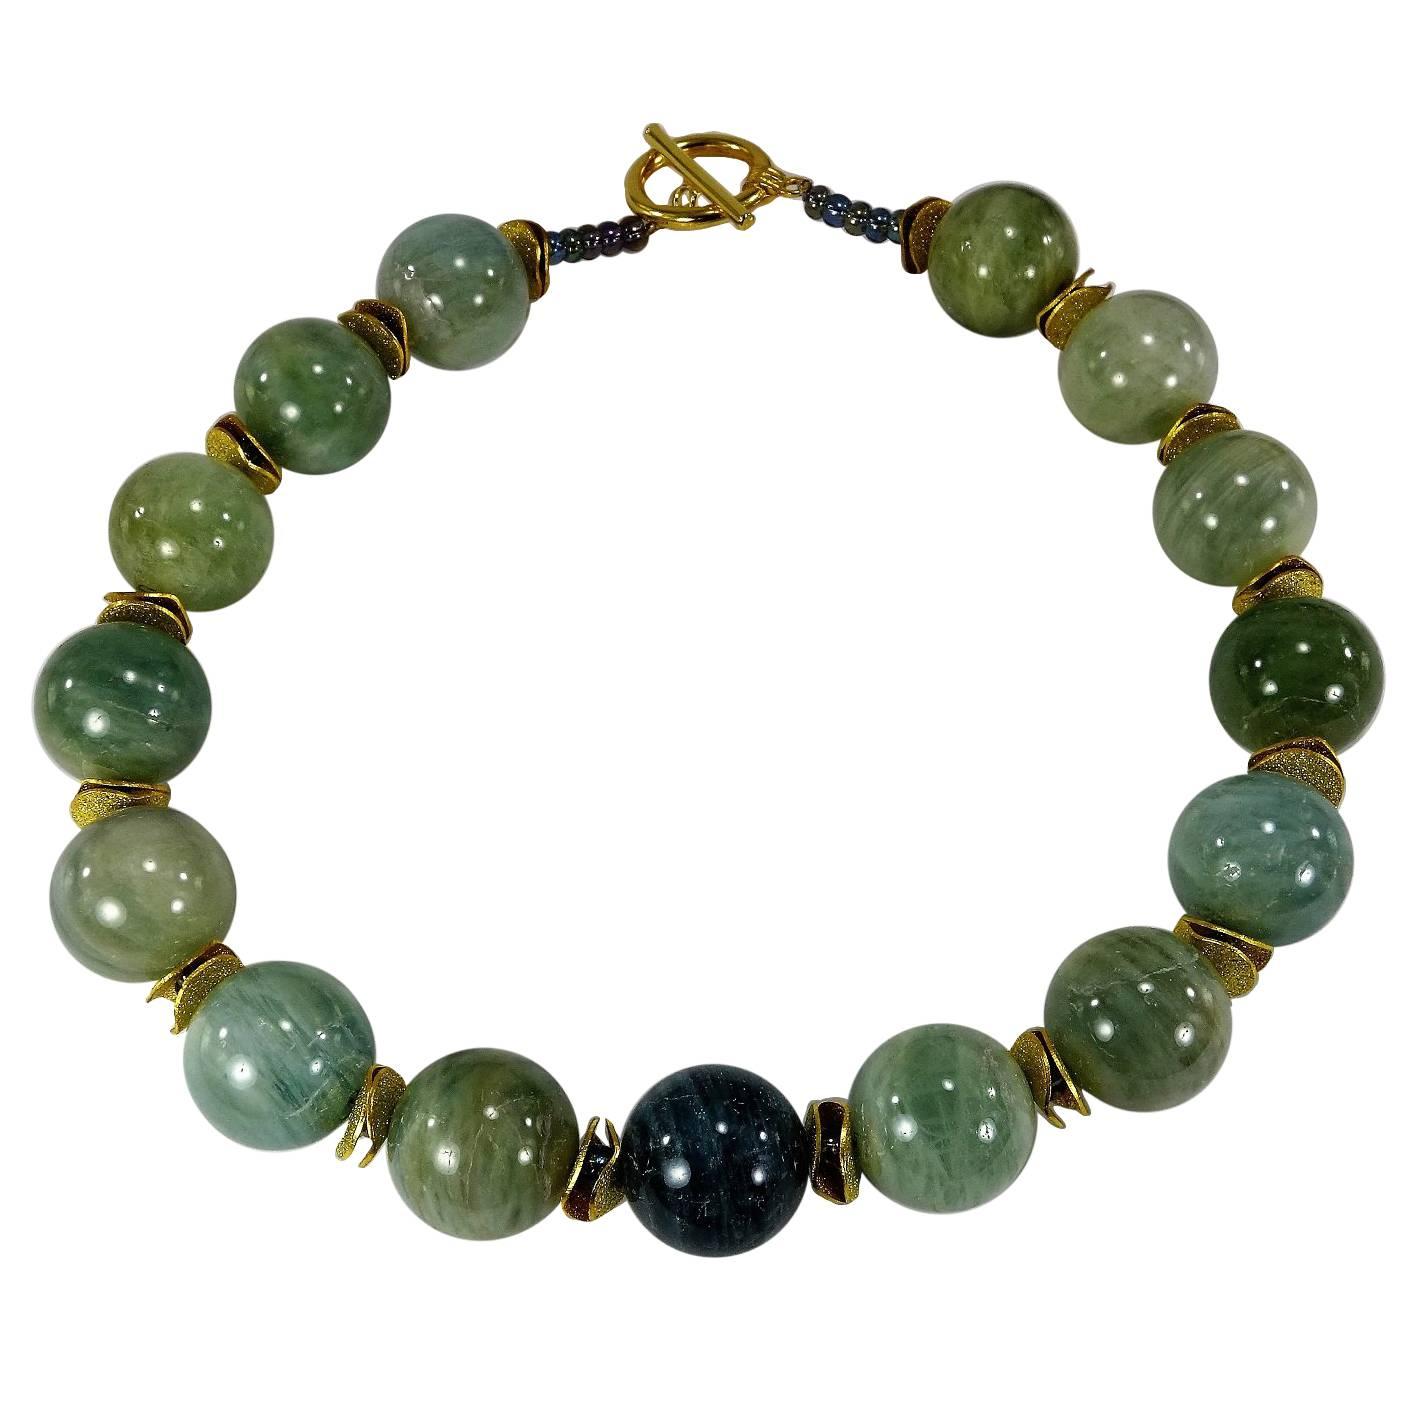 Glowing, Large Spheres of Polished Opaque Aquamarine Choker  March Birthstone